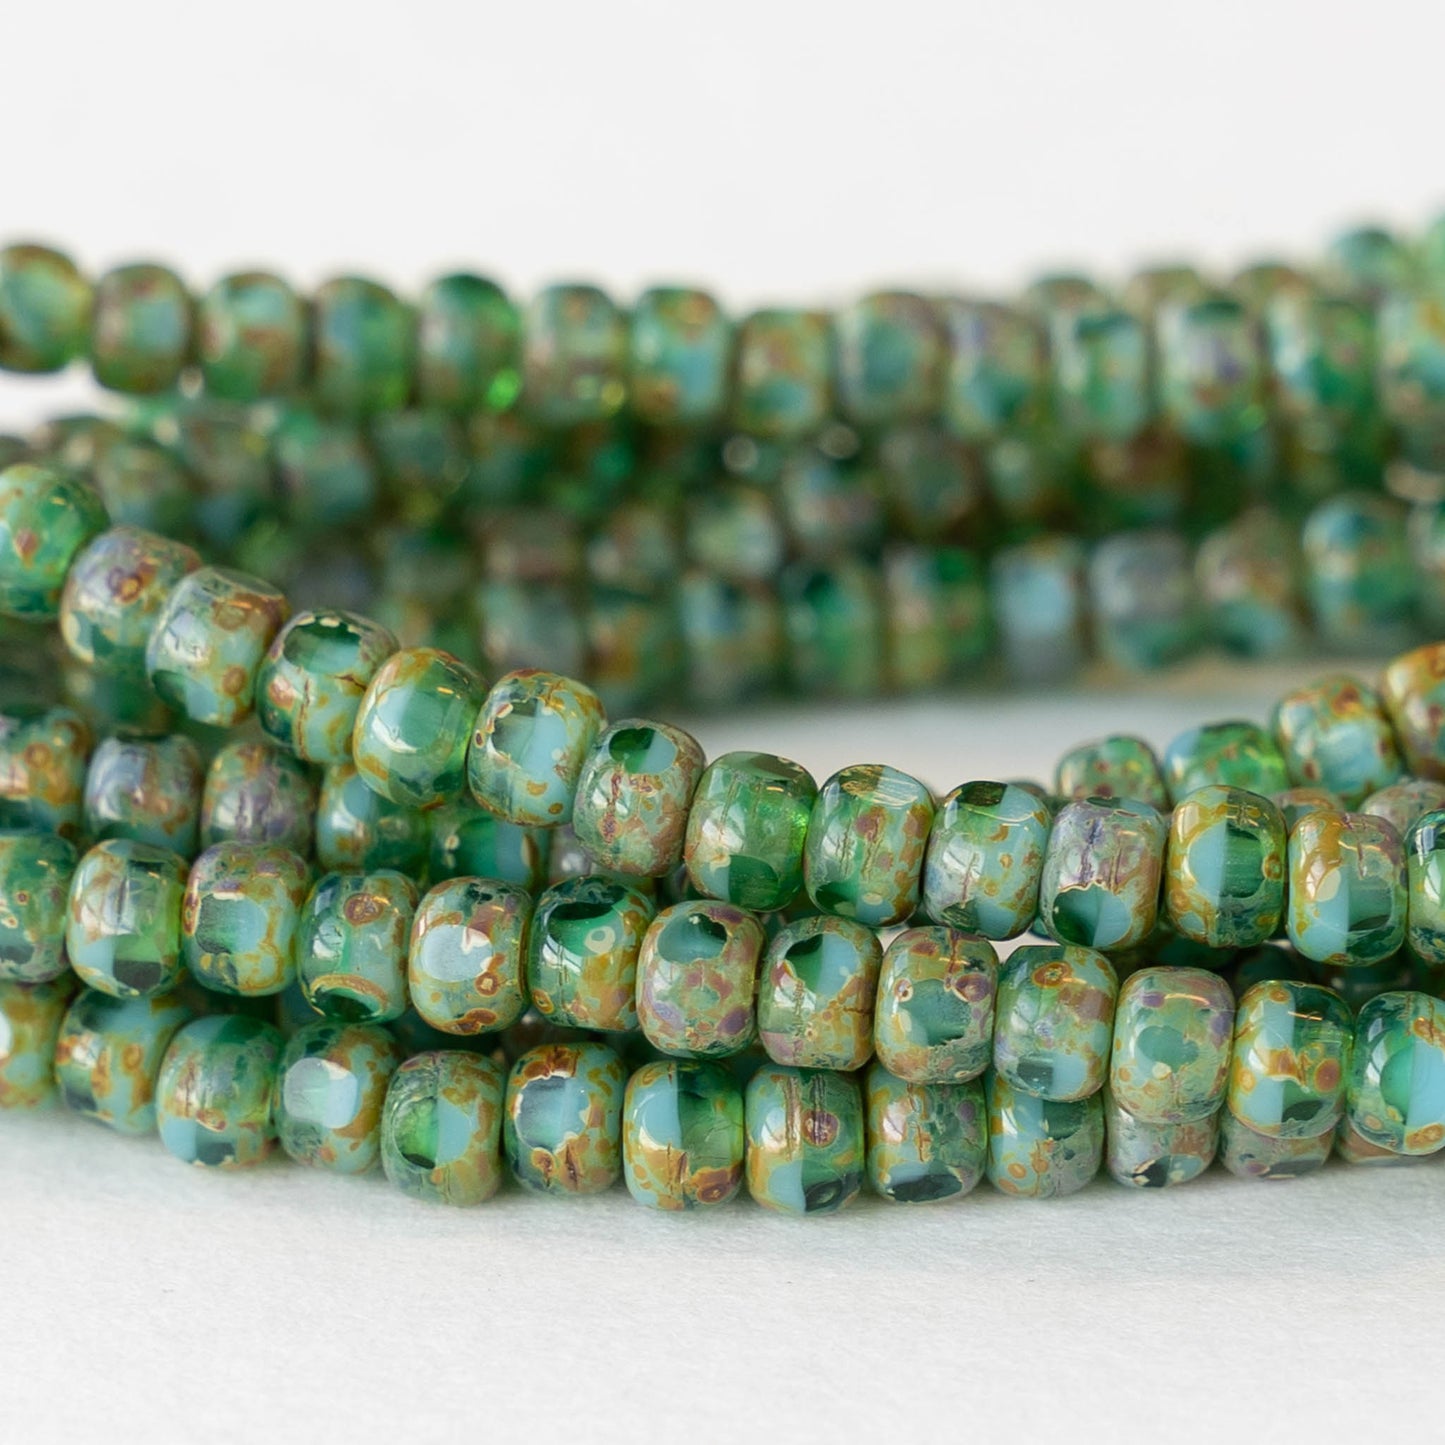 Size 6 - 3 Cut Seed Beads - Green Turquoise Picasso - 50 beads